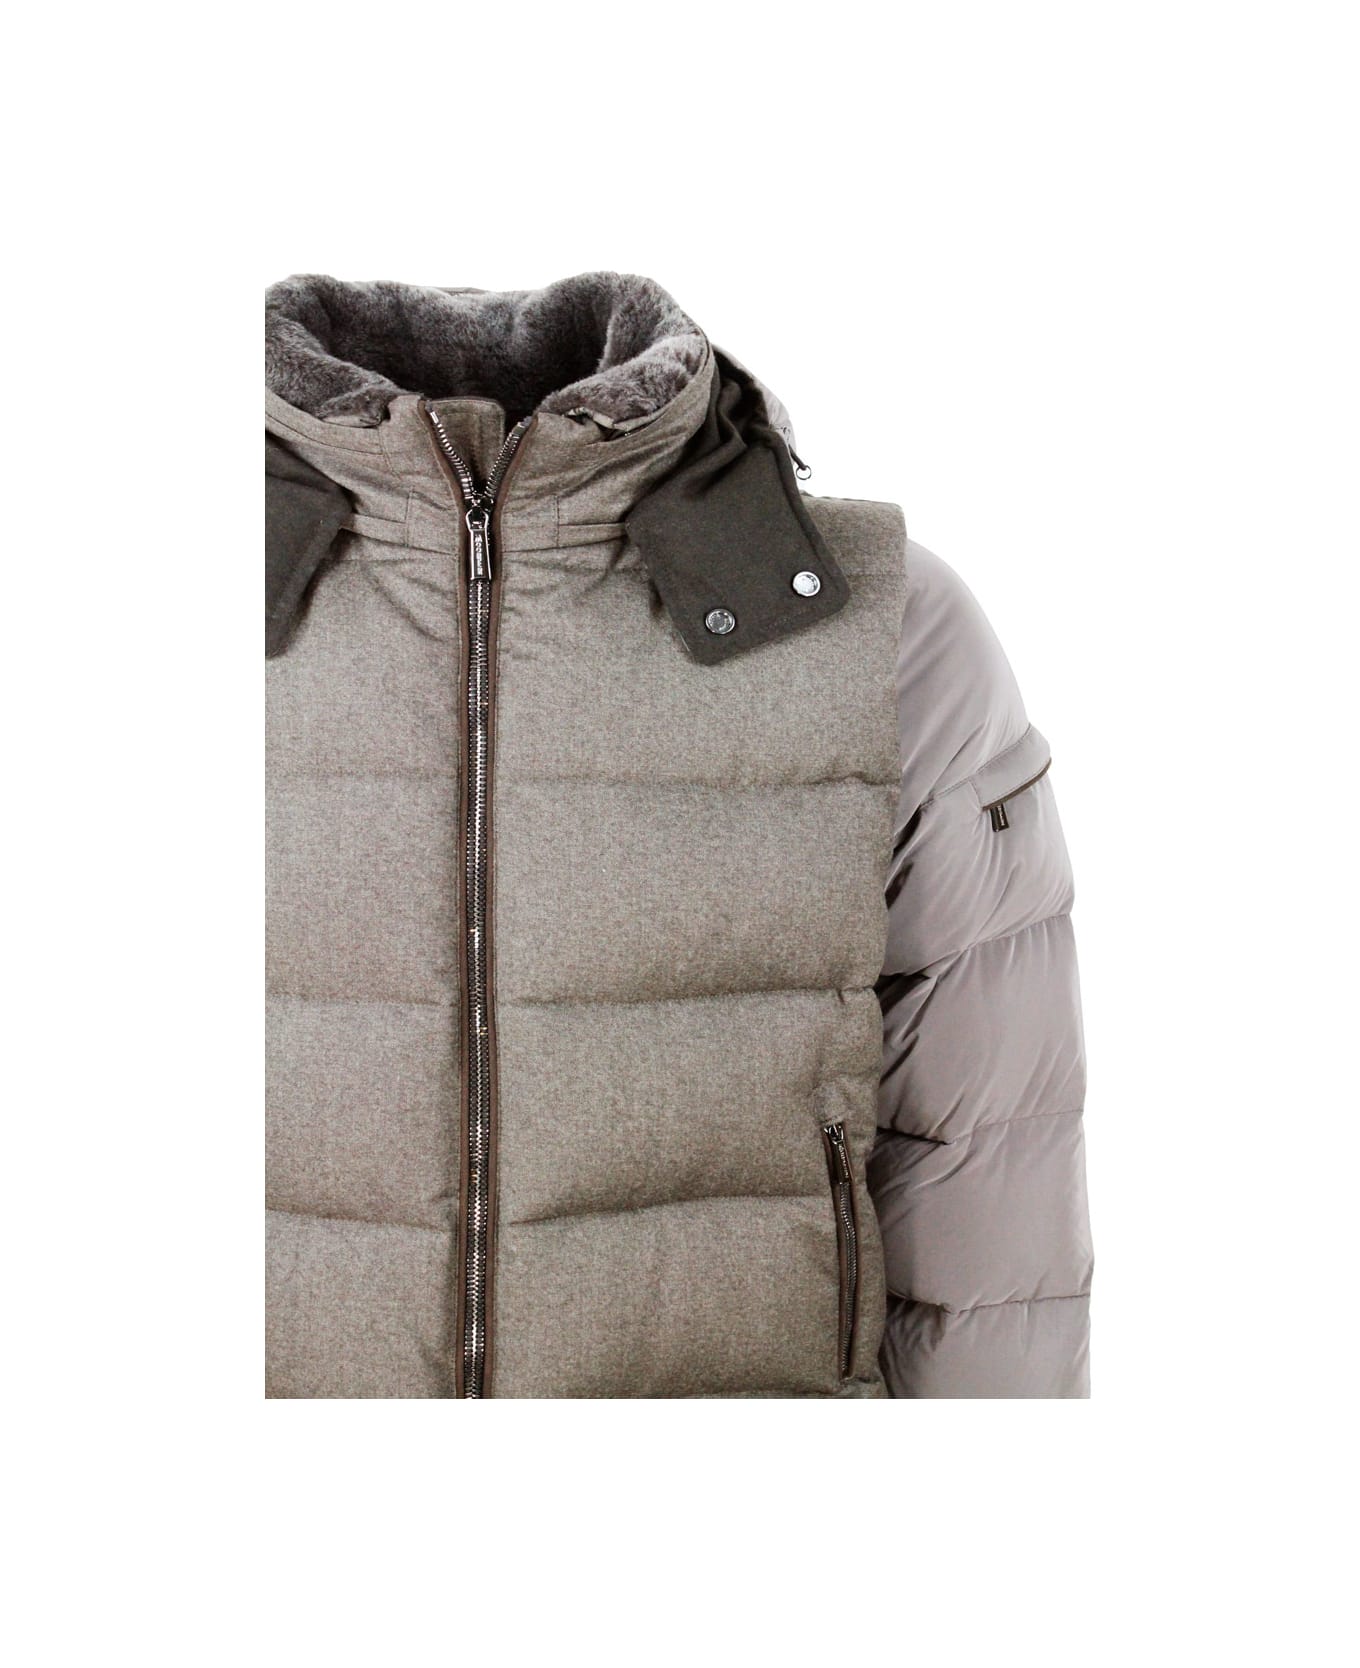 Moorer Bomber Down Jacket Made Of Fine Wool And Cashmere Flannel And Nylon Sleeves. Goose Down Padding. Collar With Detachable Fur And Hood - Cacao